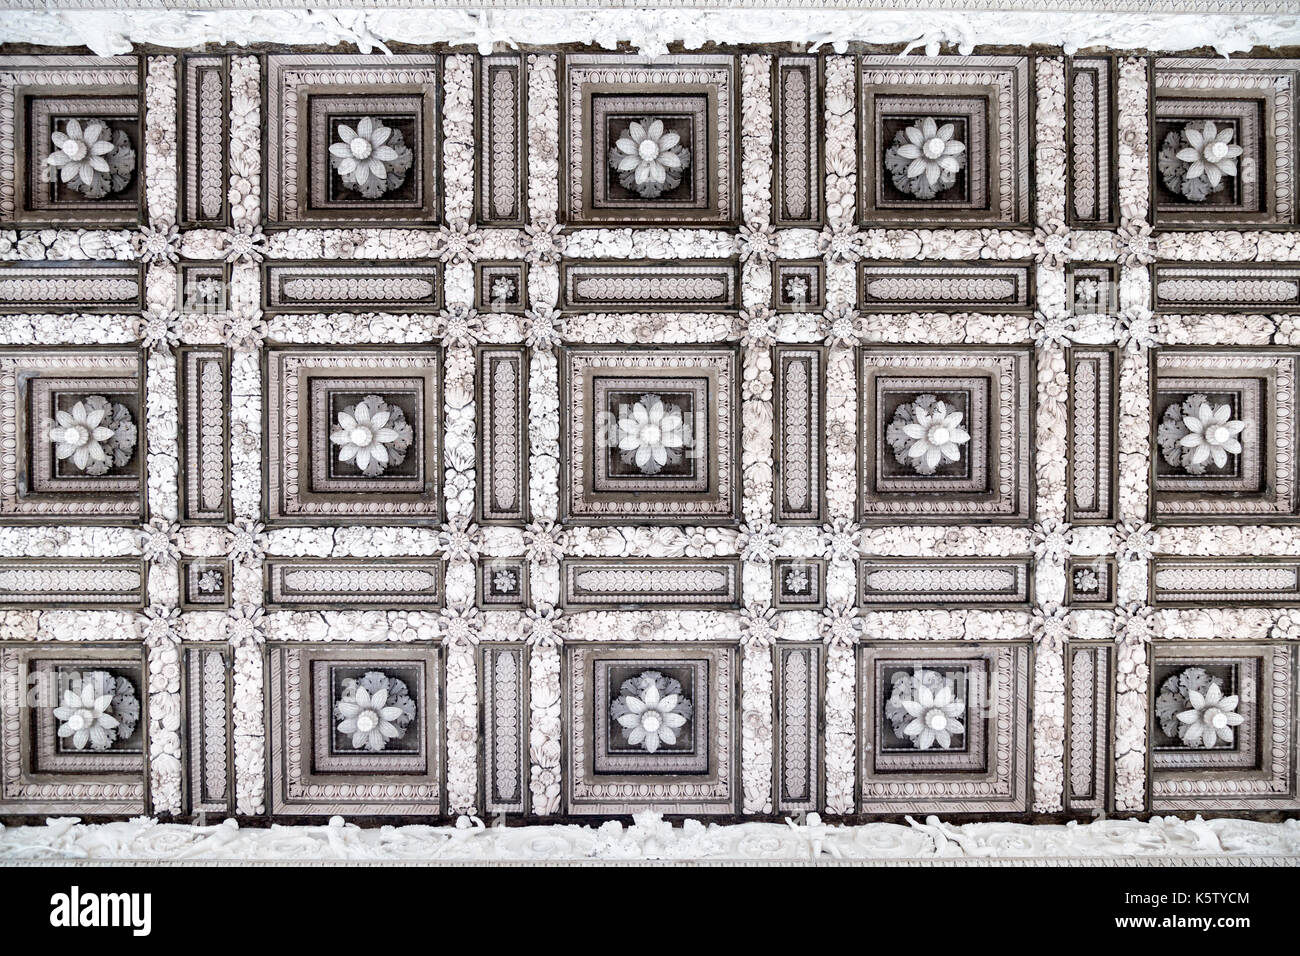 Detail of ornate coffered ceiling outside the portico entrance of the Fitzwilliam Museum, Cambridge, UK Stock Photo